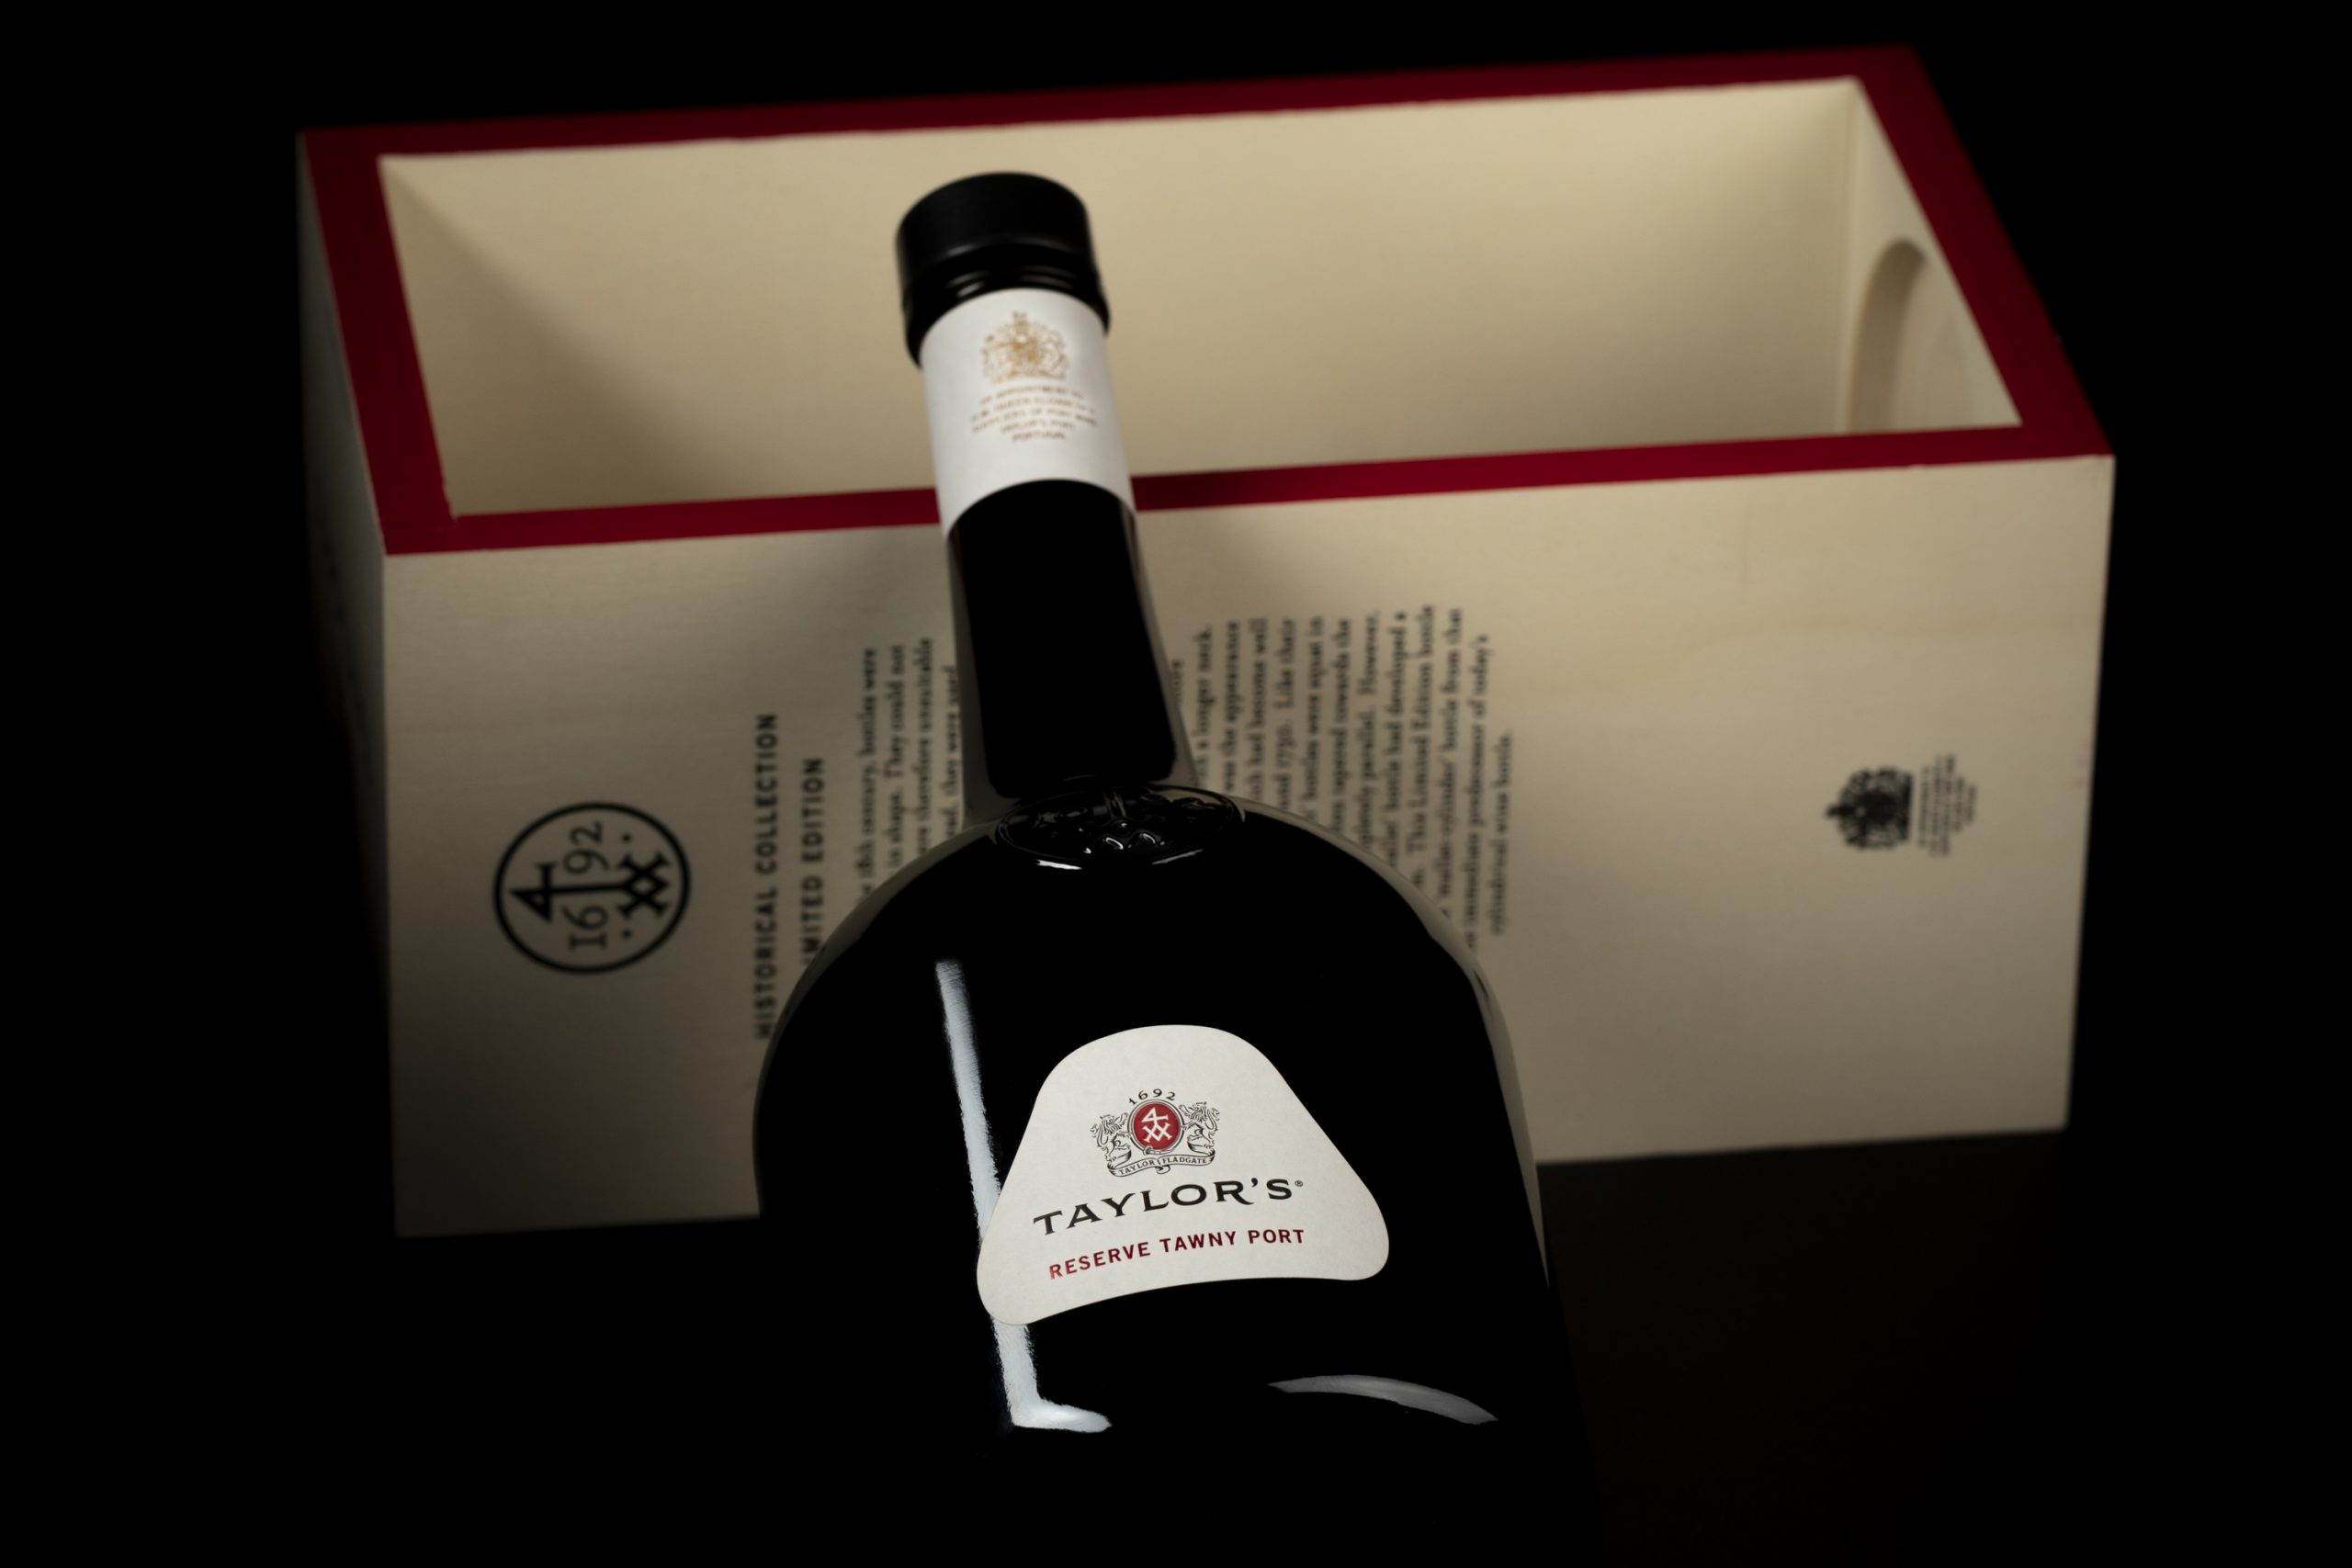 Taylor's Historical Collection III: Taylor's limited edition from historical bottle collection